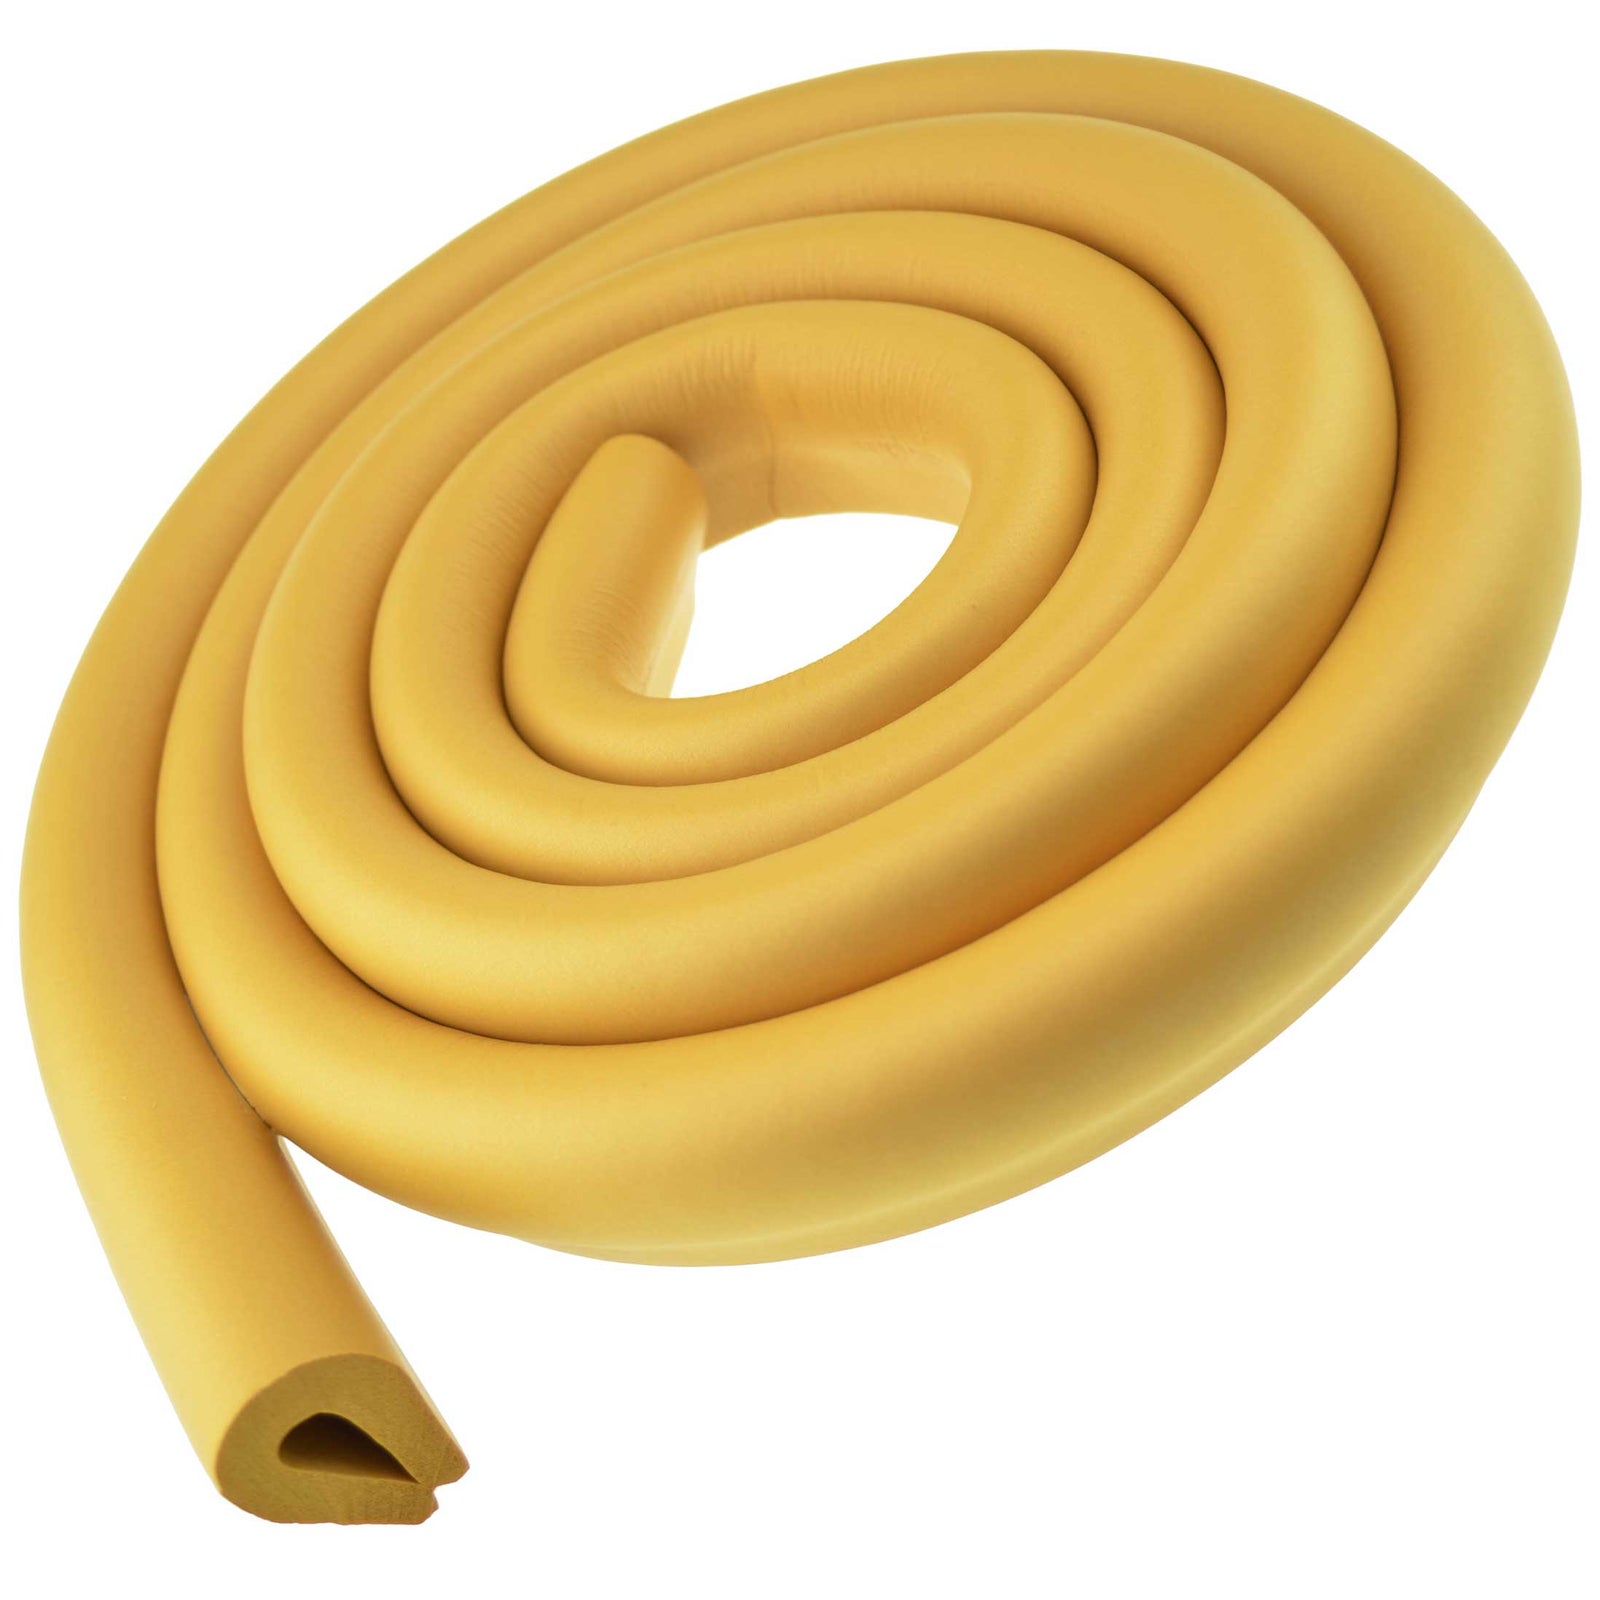 1 Roll Ginger Yellow U-Shaped Foam Edge Protector 78.7 inches (2 meters)